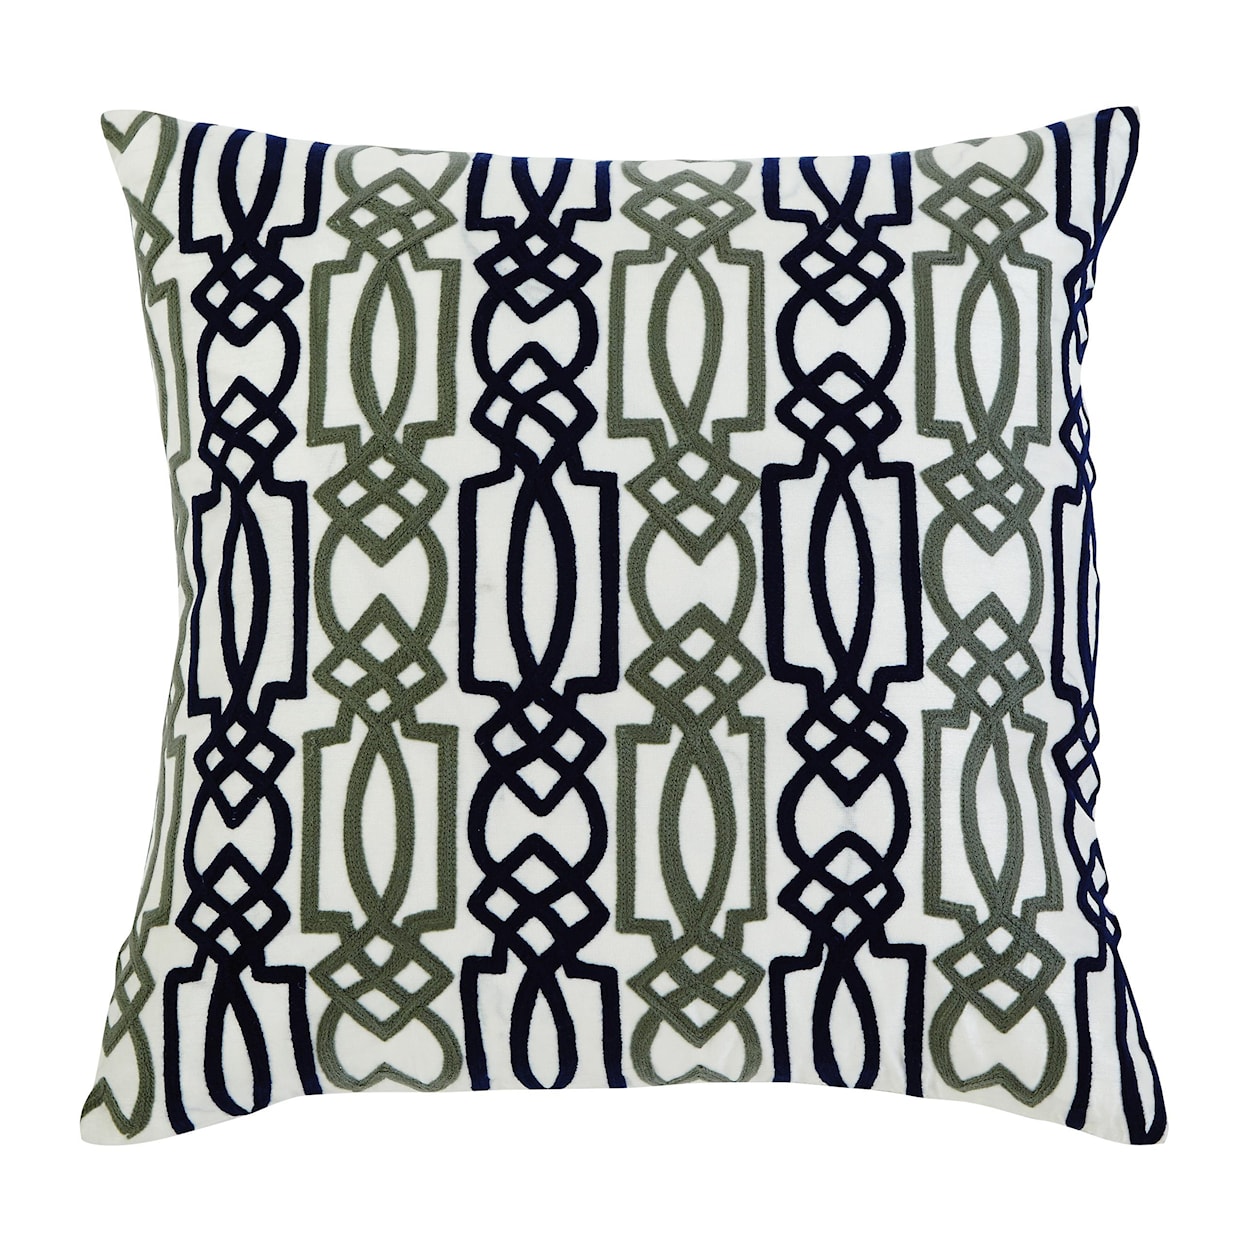 Ashley Furniture Signature Design Pillows Embroidered - Navy Pillow